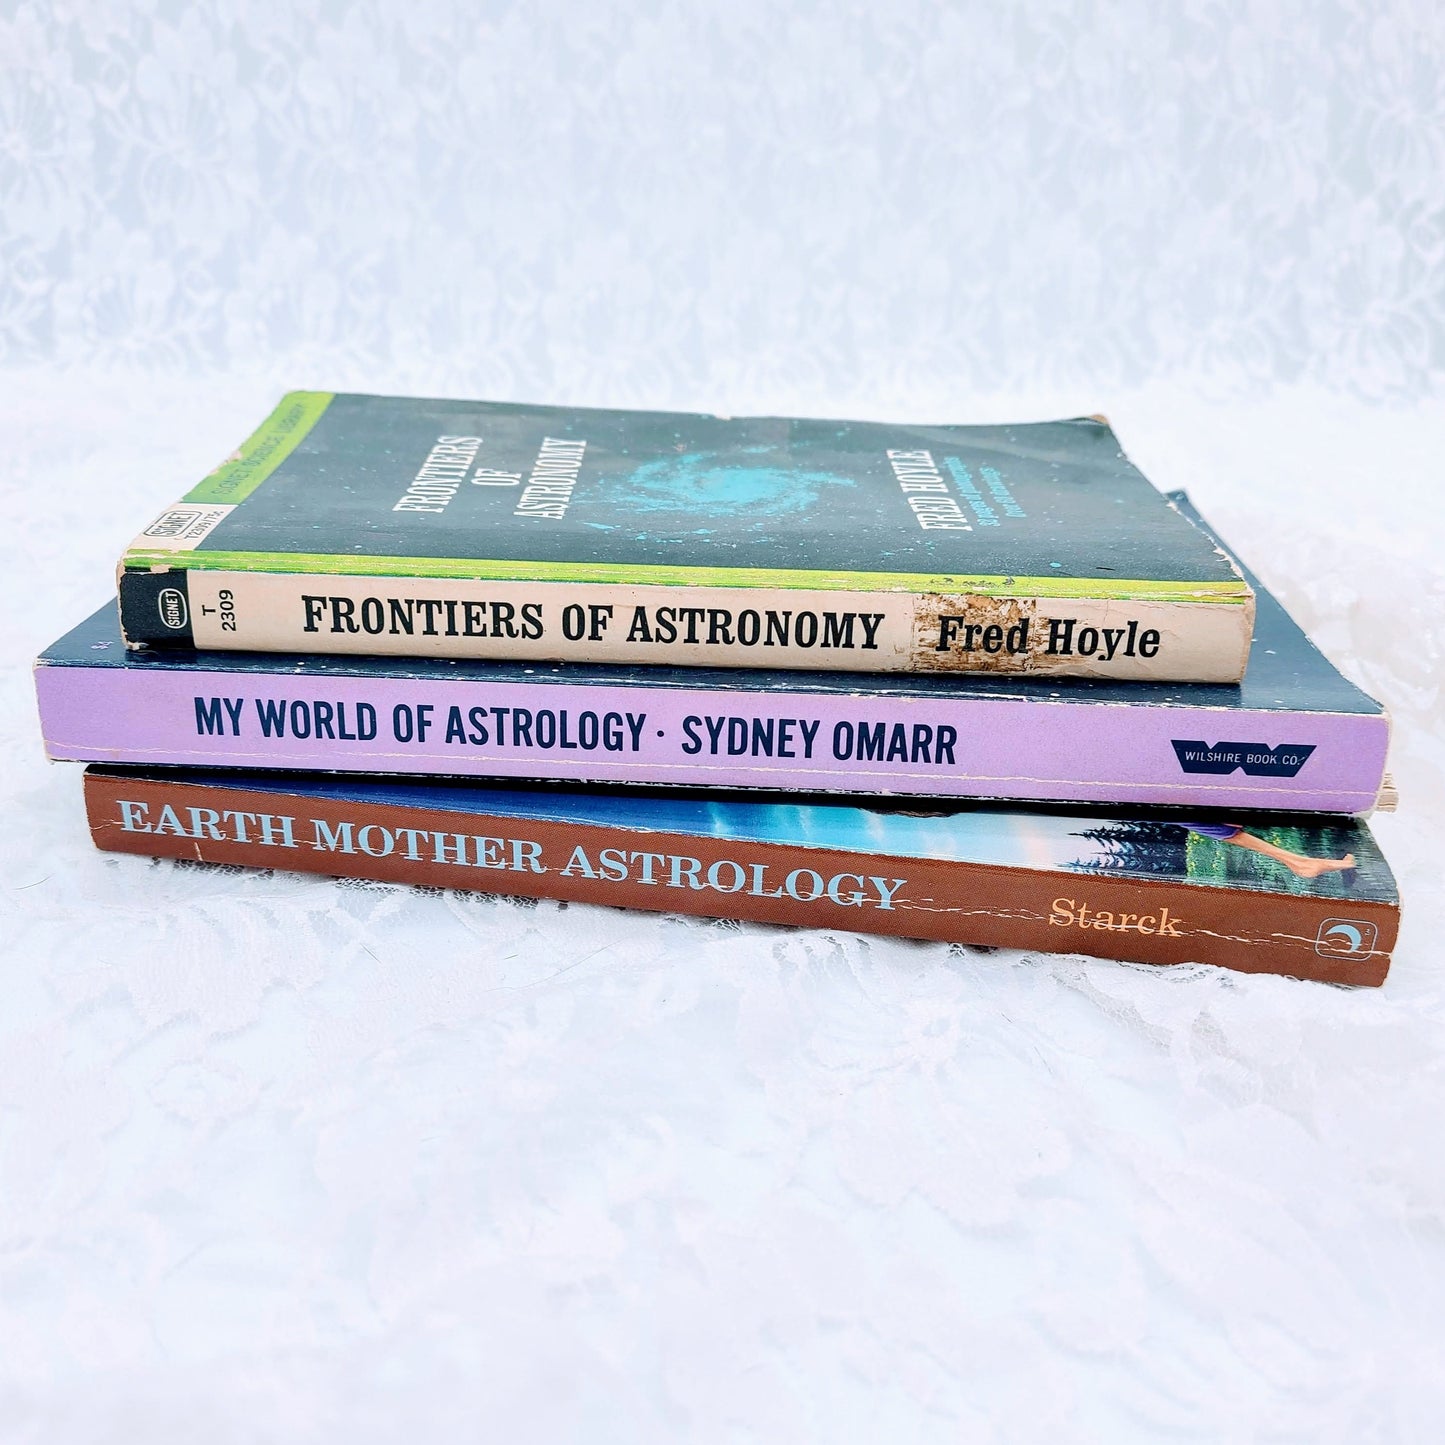 #1) Frontiers of Astronomy by Fred Hoyle  #2) My World of Astrology by SYDNEY OMARR (CLASSIC and a MUST HAVE)  #3) Earth Mother AStrology by Stark